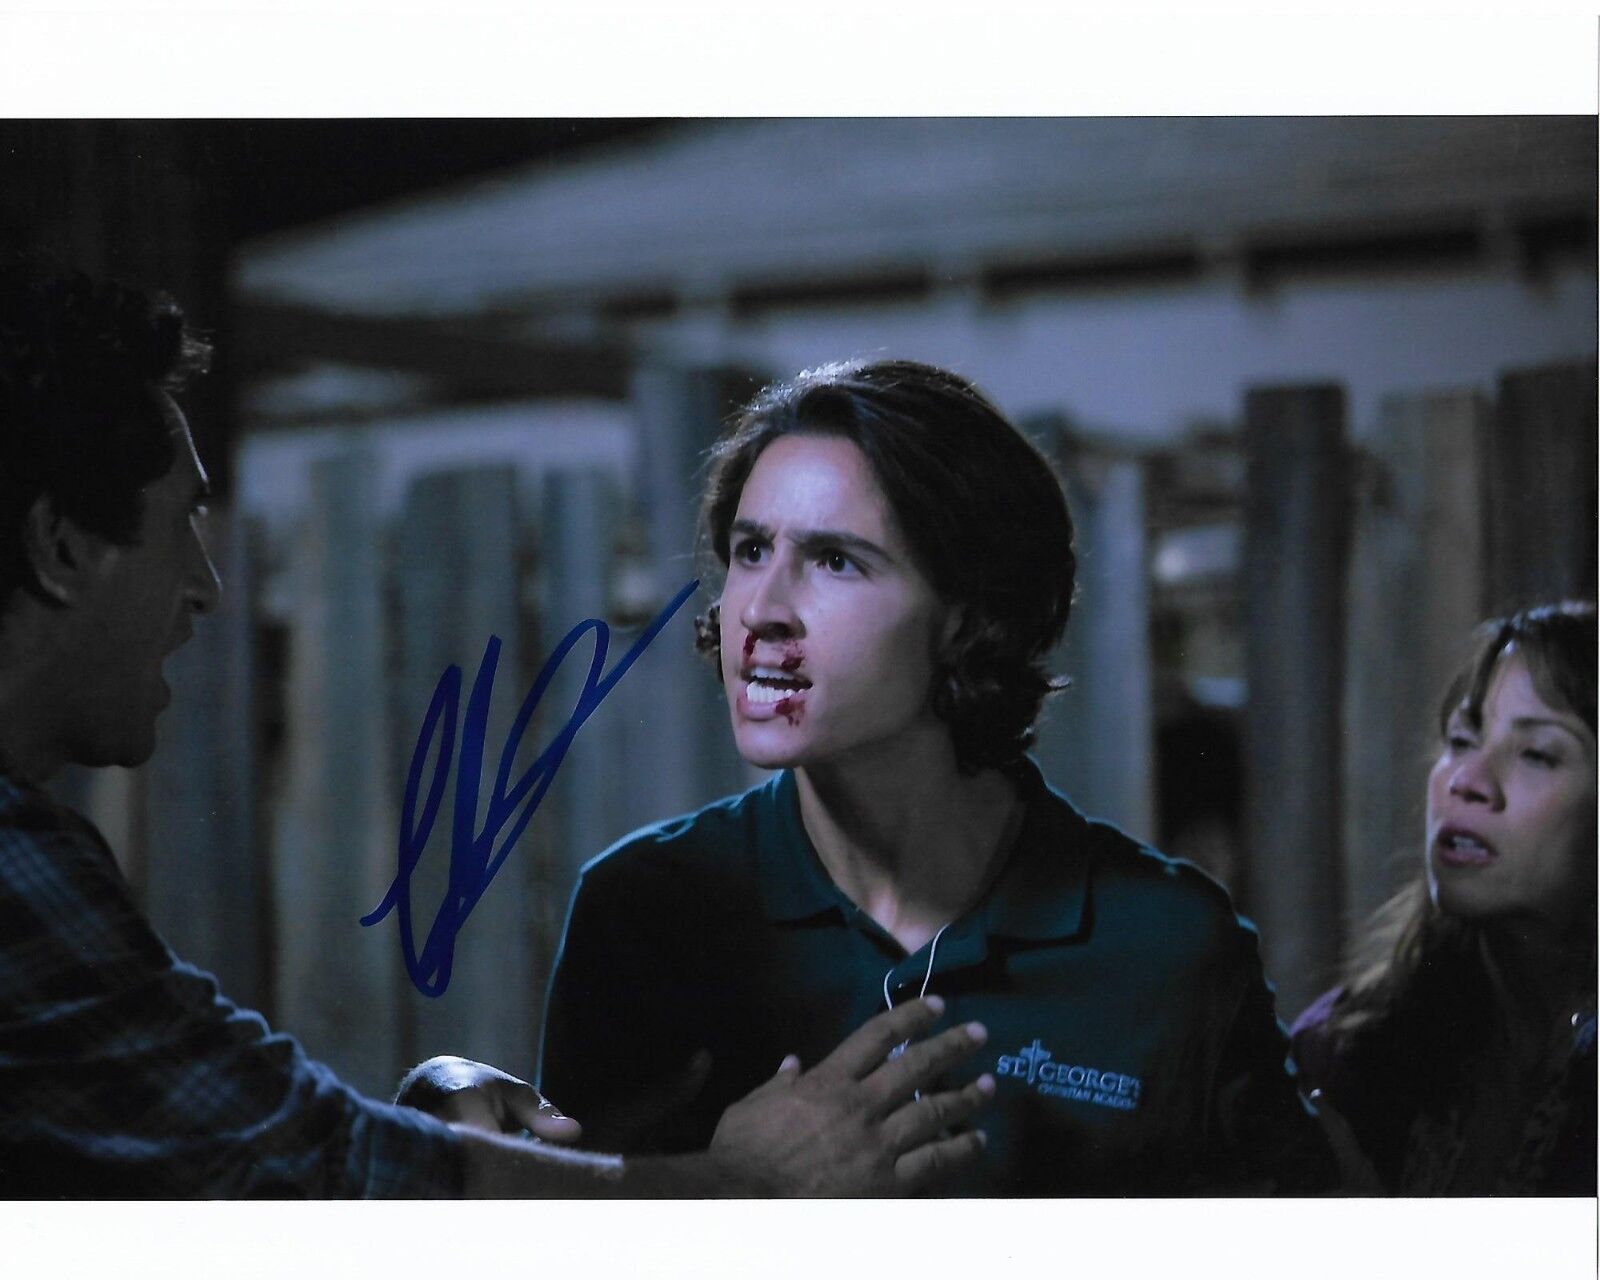 LORENZO HENRIE FEAR THE WALKING DEAD AUTOGRAPHED Photo Poster painting SIGNED 8X10 #12 CHRIS